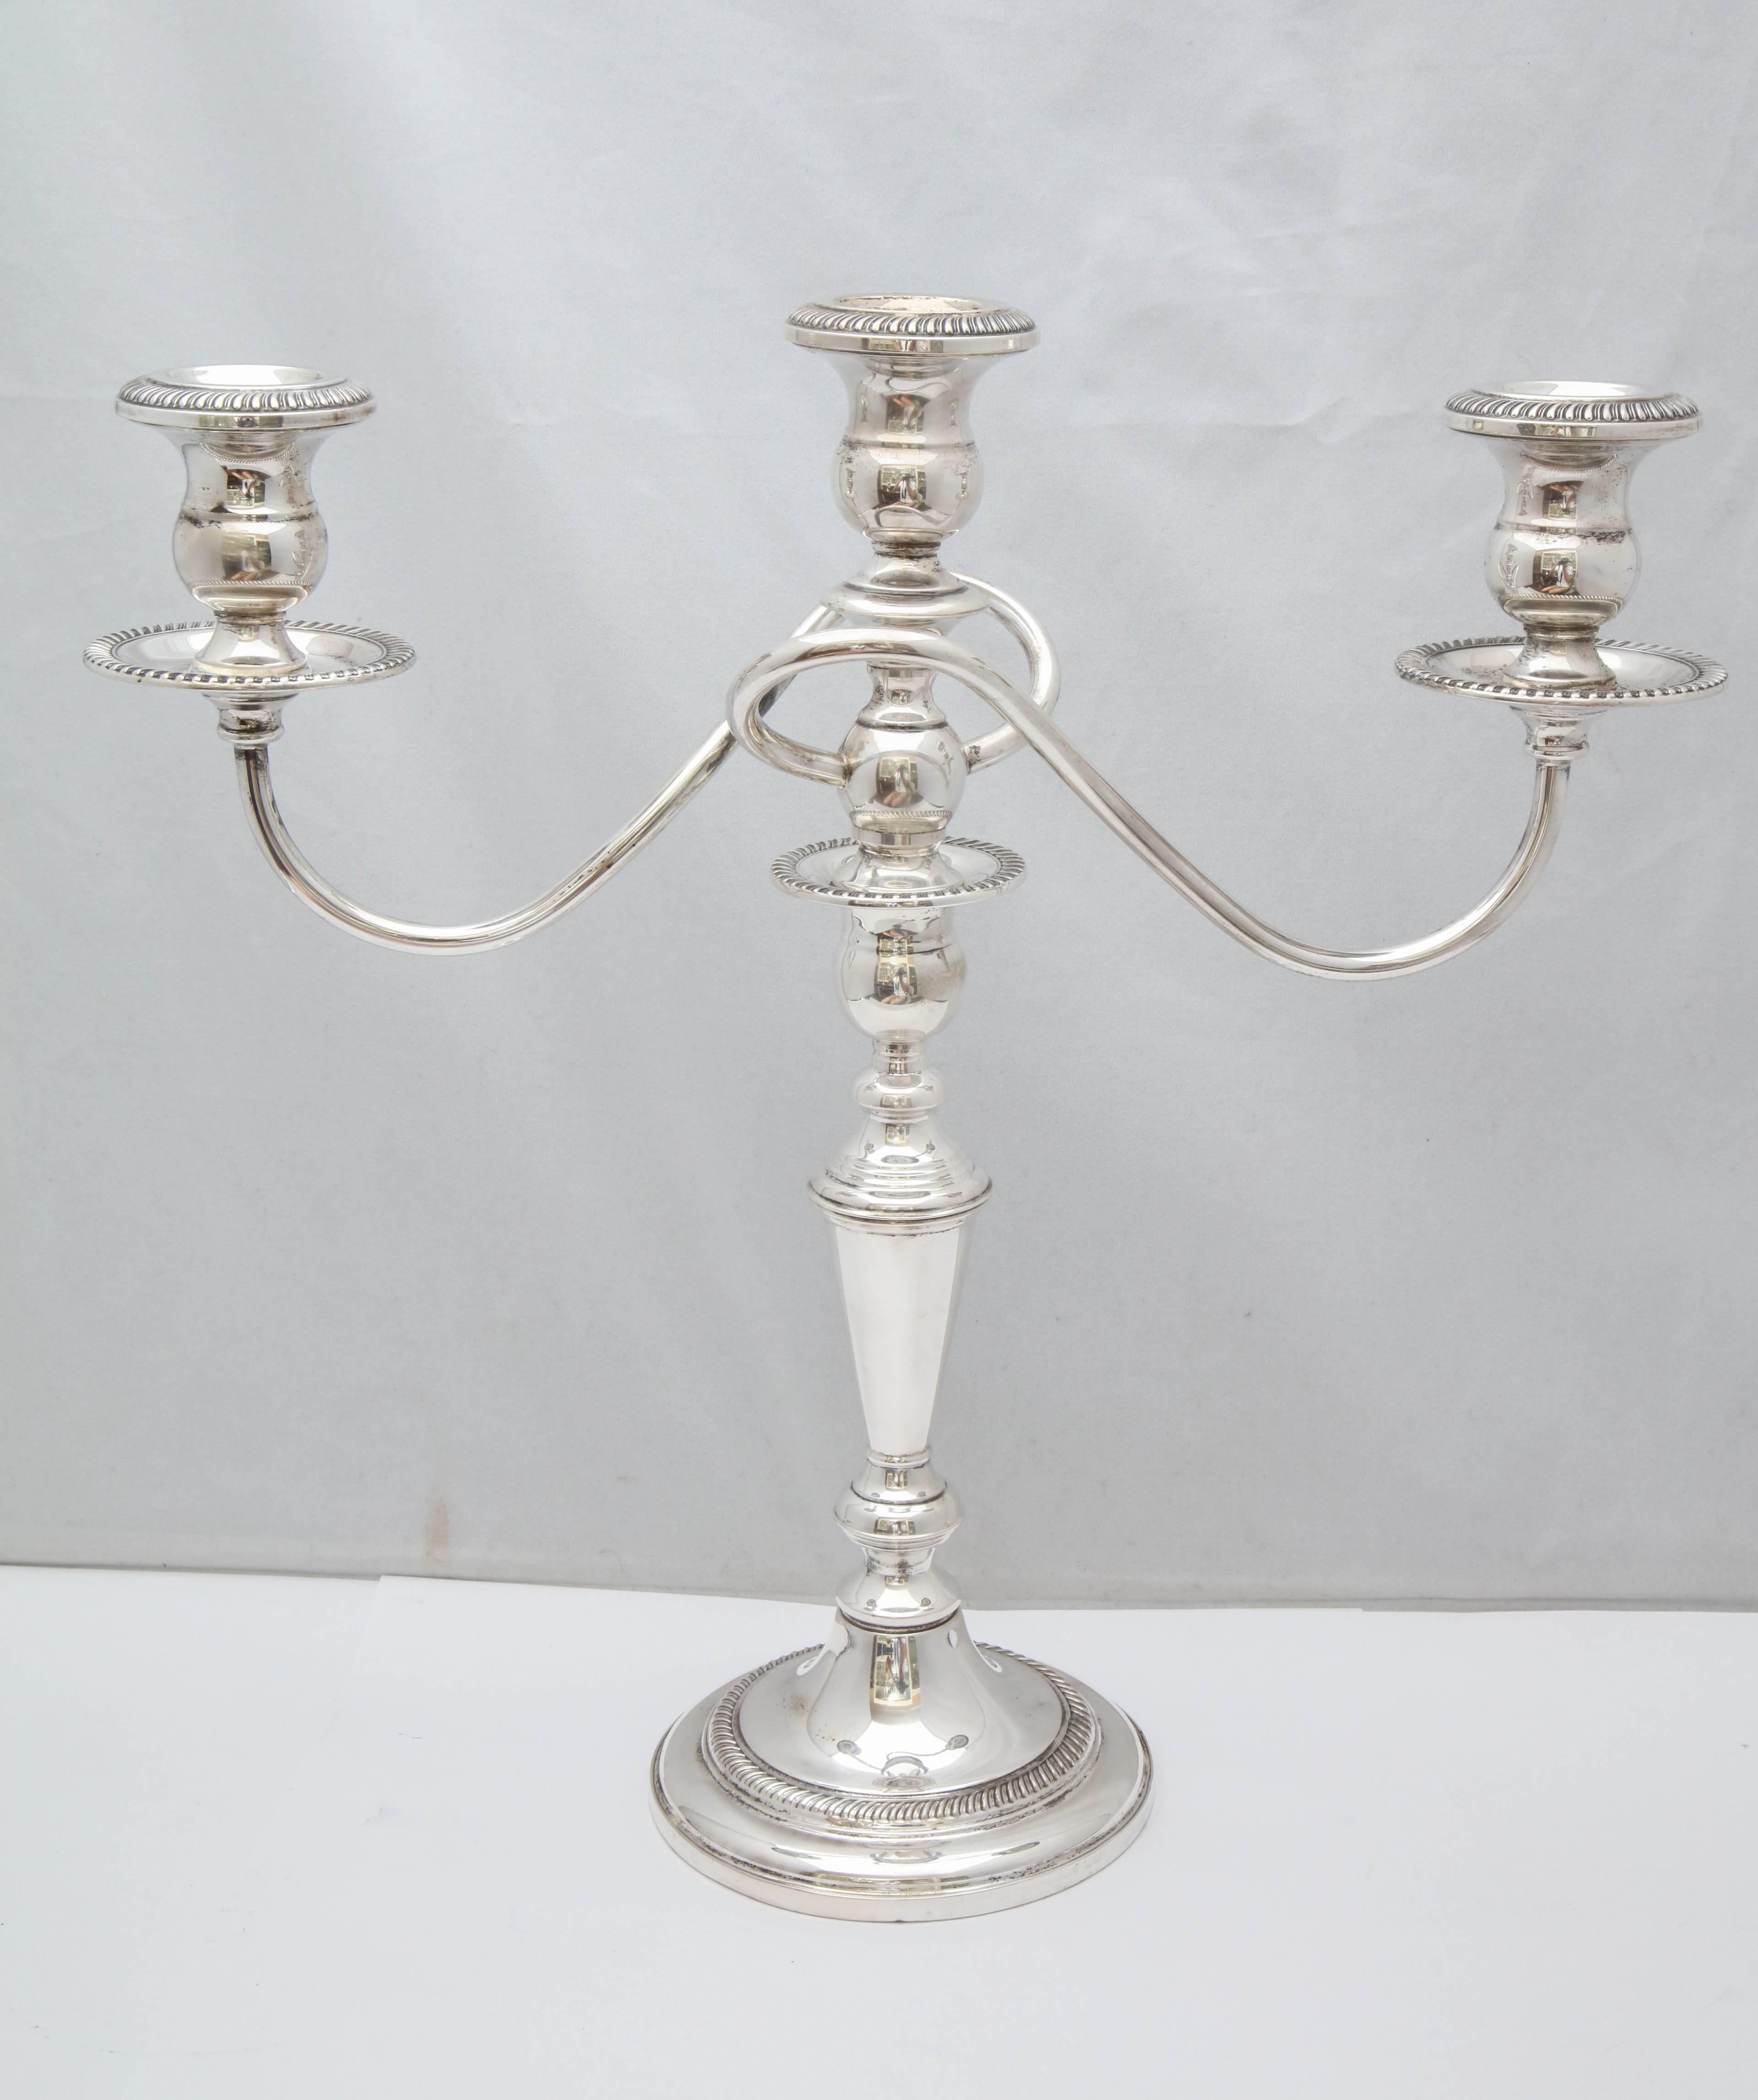 Pair of sterling silver, Empire-style candelabra that can convert to three different sizes, all of which fit the candelabra arms. Fisher Silversmiths, Inc., New jersey, circa 1930s. Measure: 13 1/4 inches high x 13 1/2 inches across arms x 4 1/2